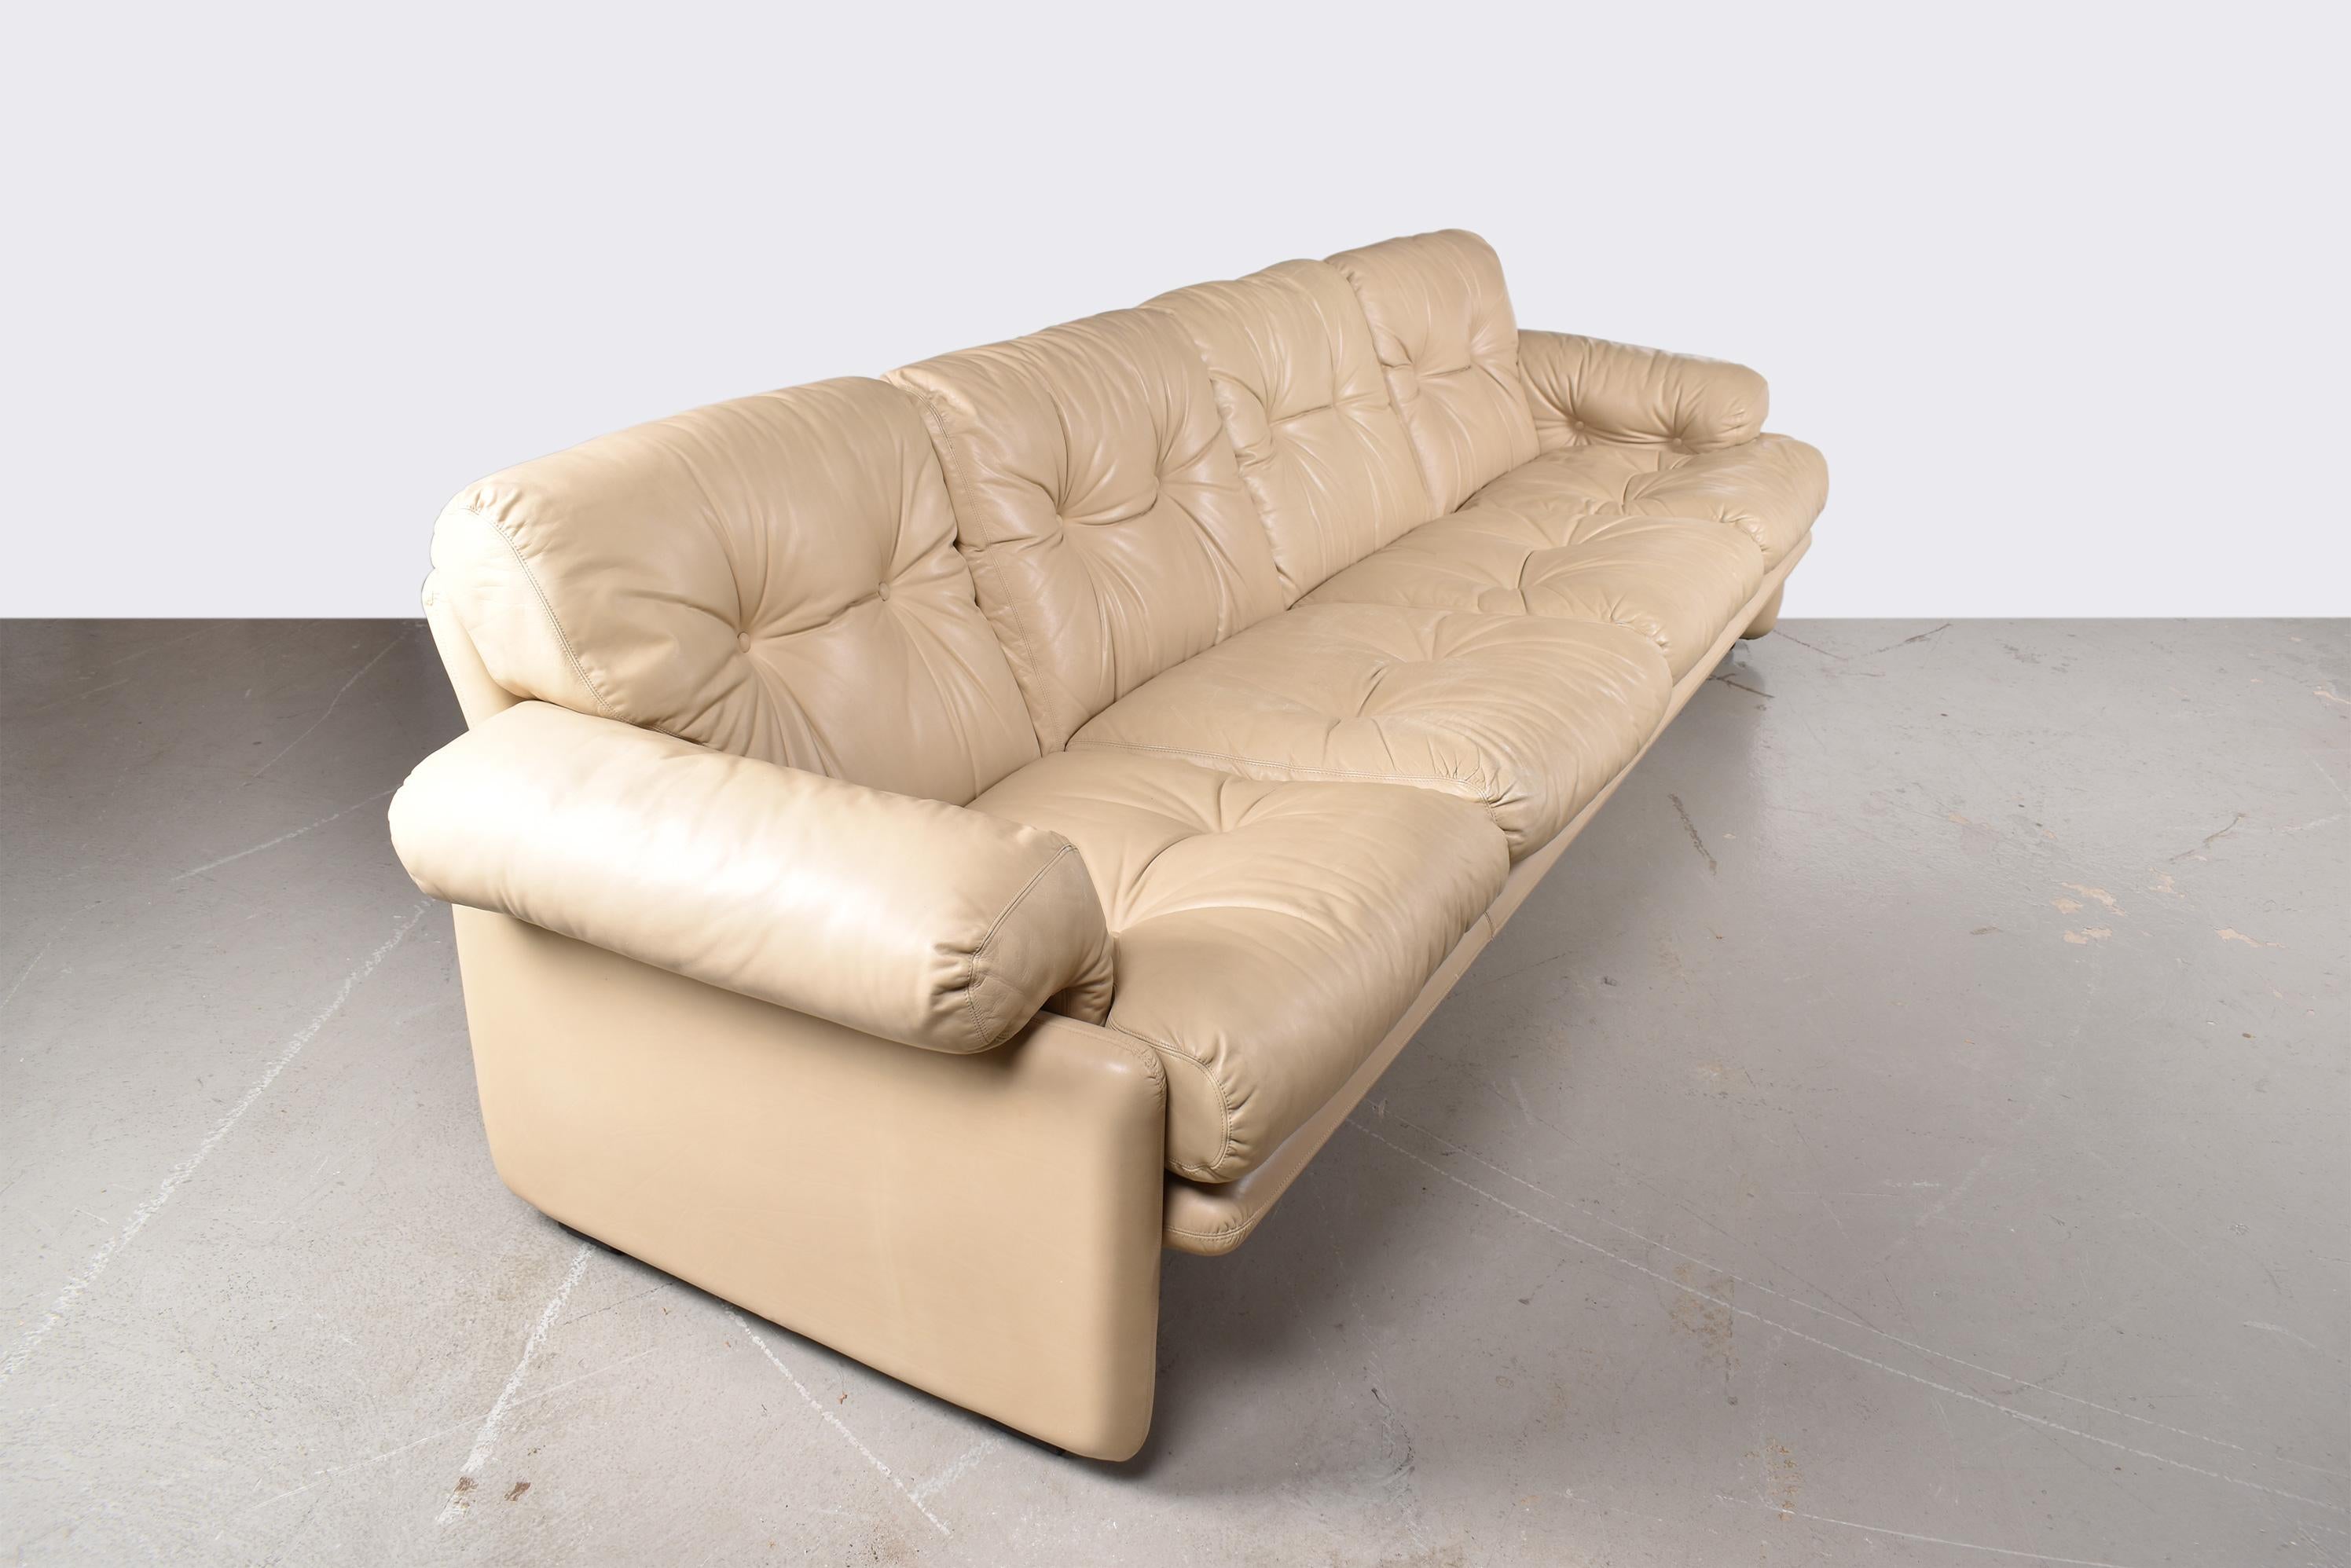 Afra and Tobia Scarpa Coronado Ivory Leather Four Seater Sofa, Italy, 1980 In Good Condition For Sale In Le Grand-Saconnex, CH